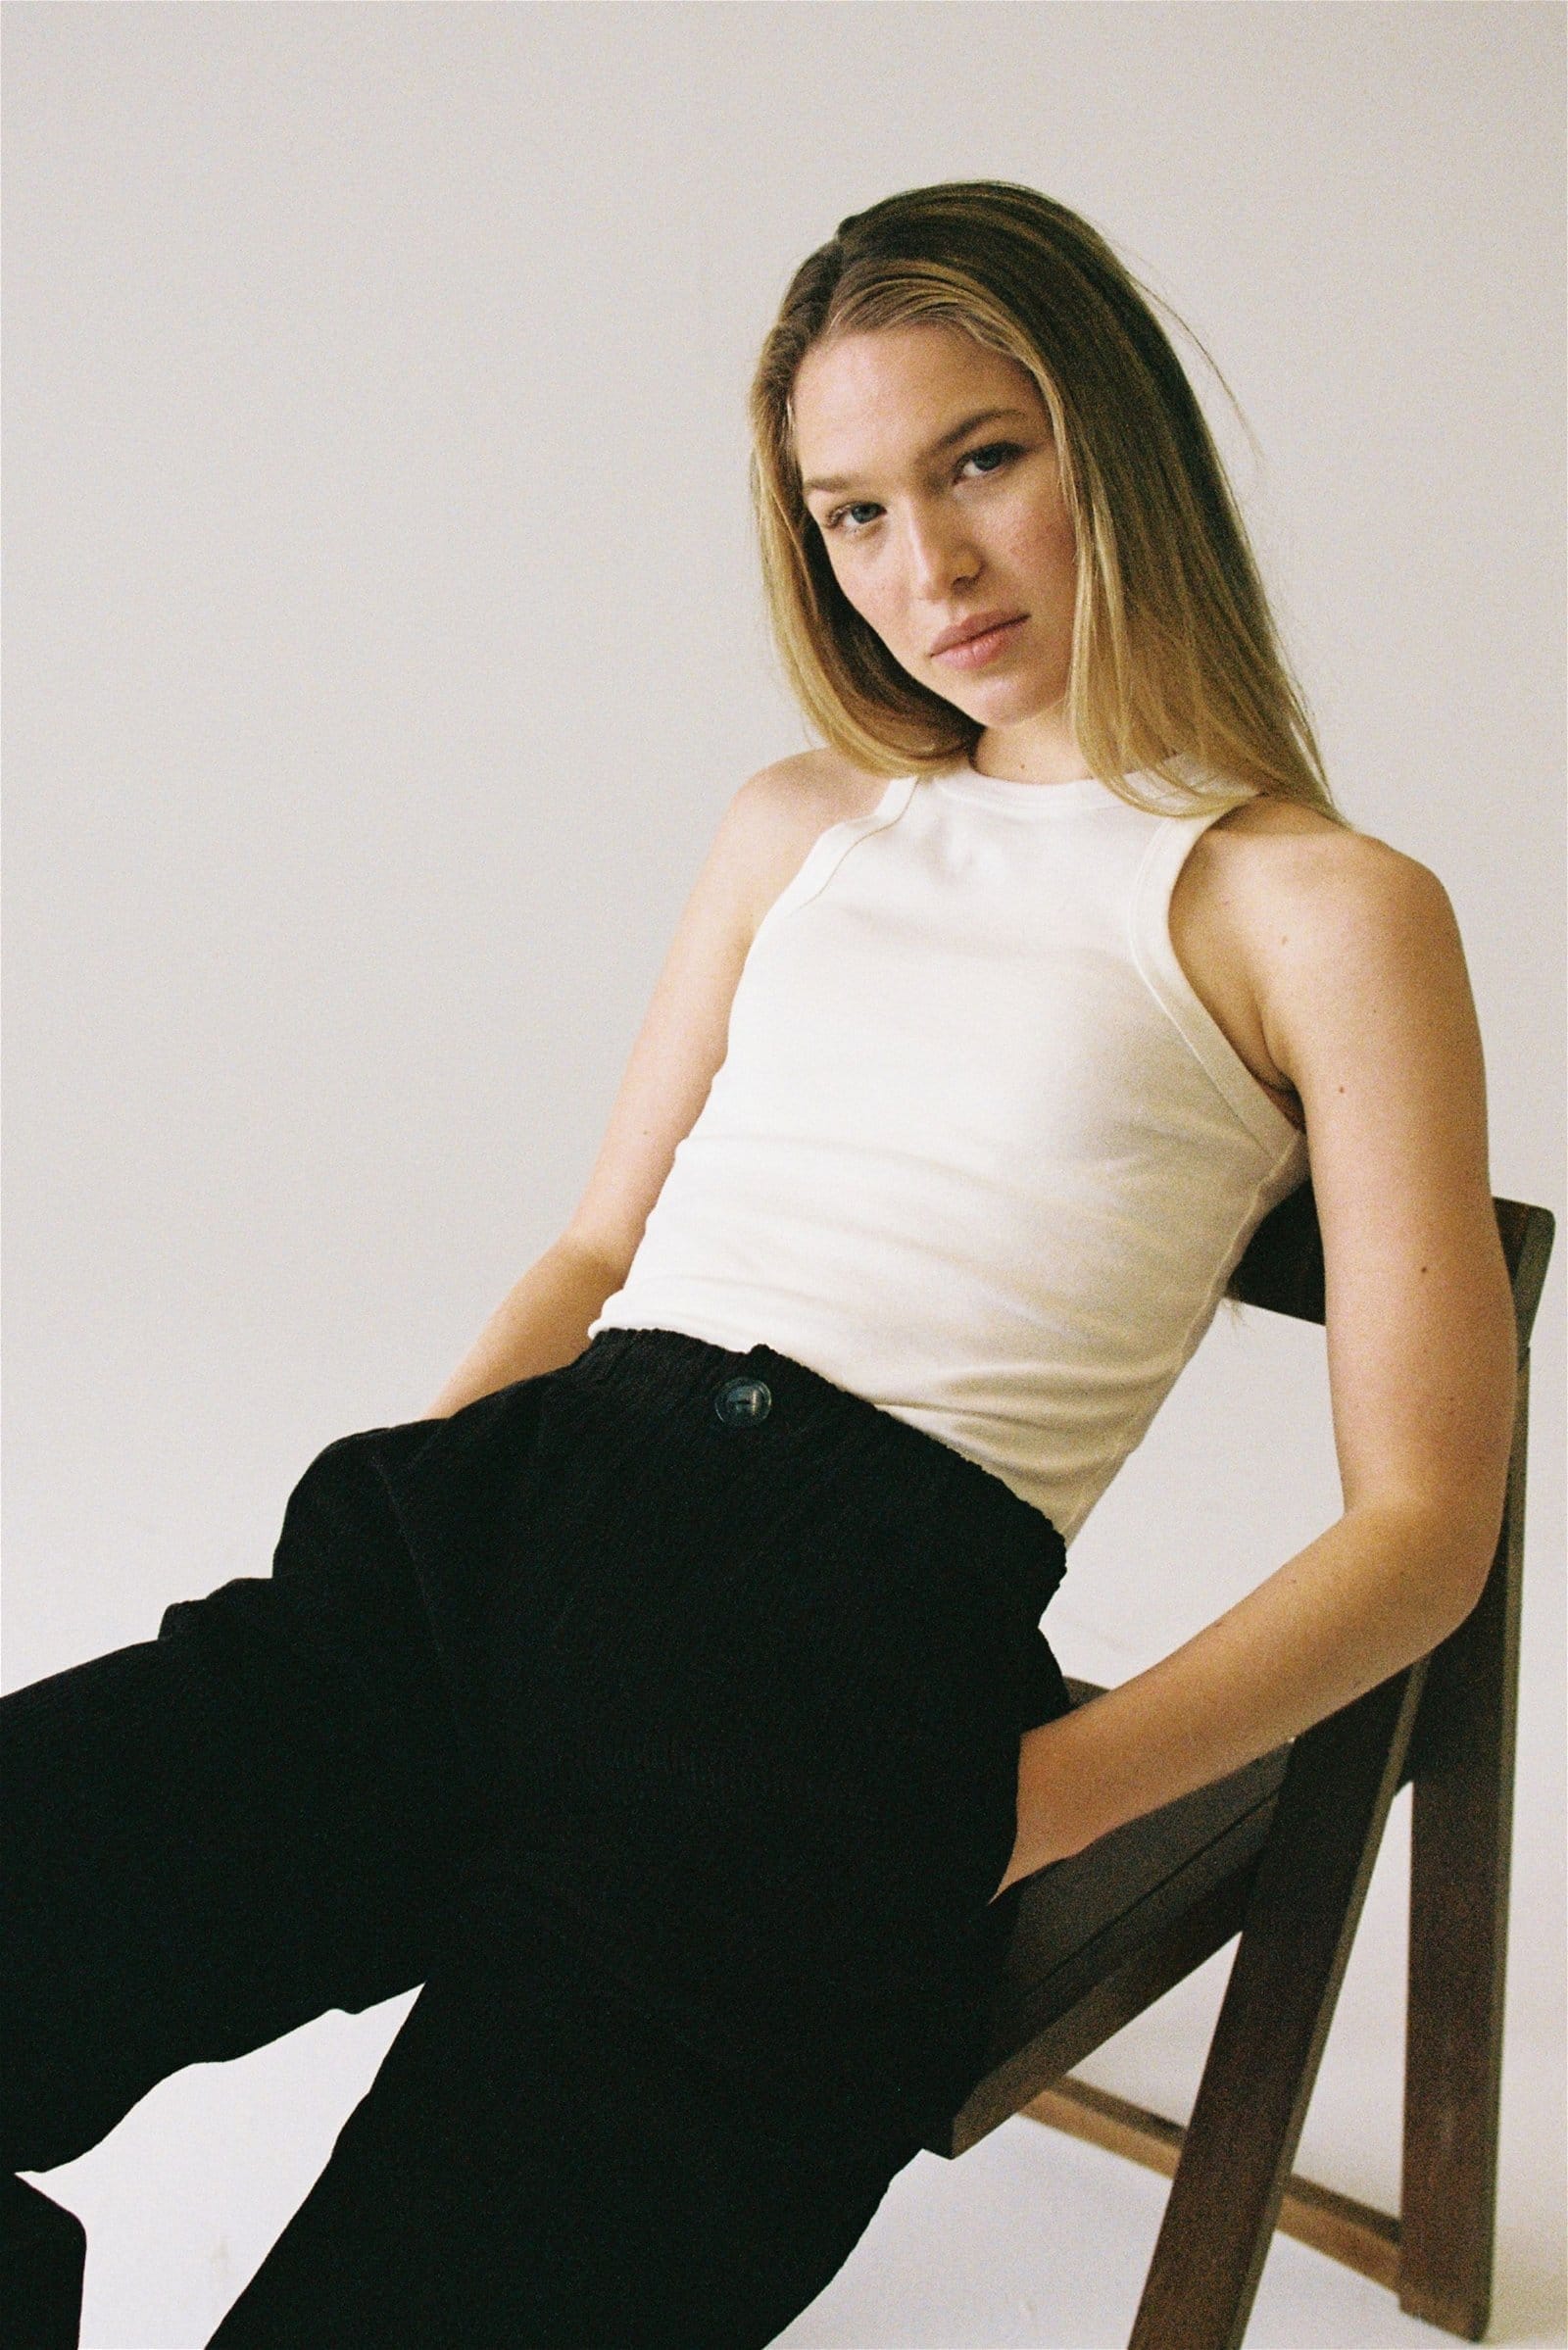 blond woman reclines on a folding chair wearing black pants and a white cotton halter tank looking at camera.